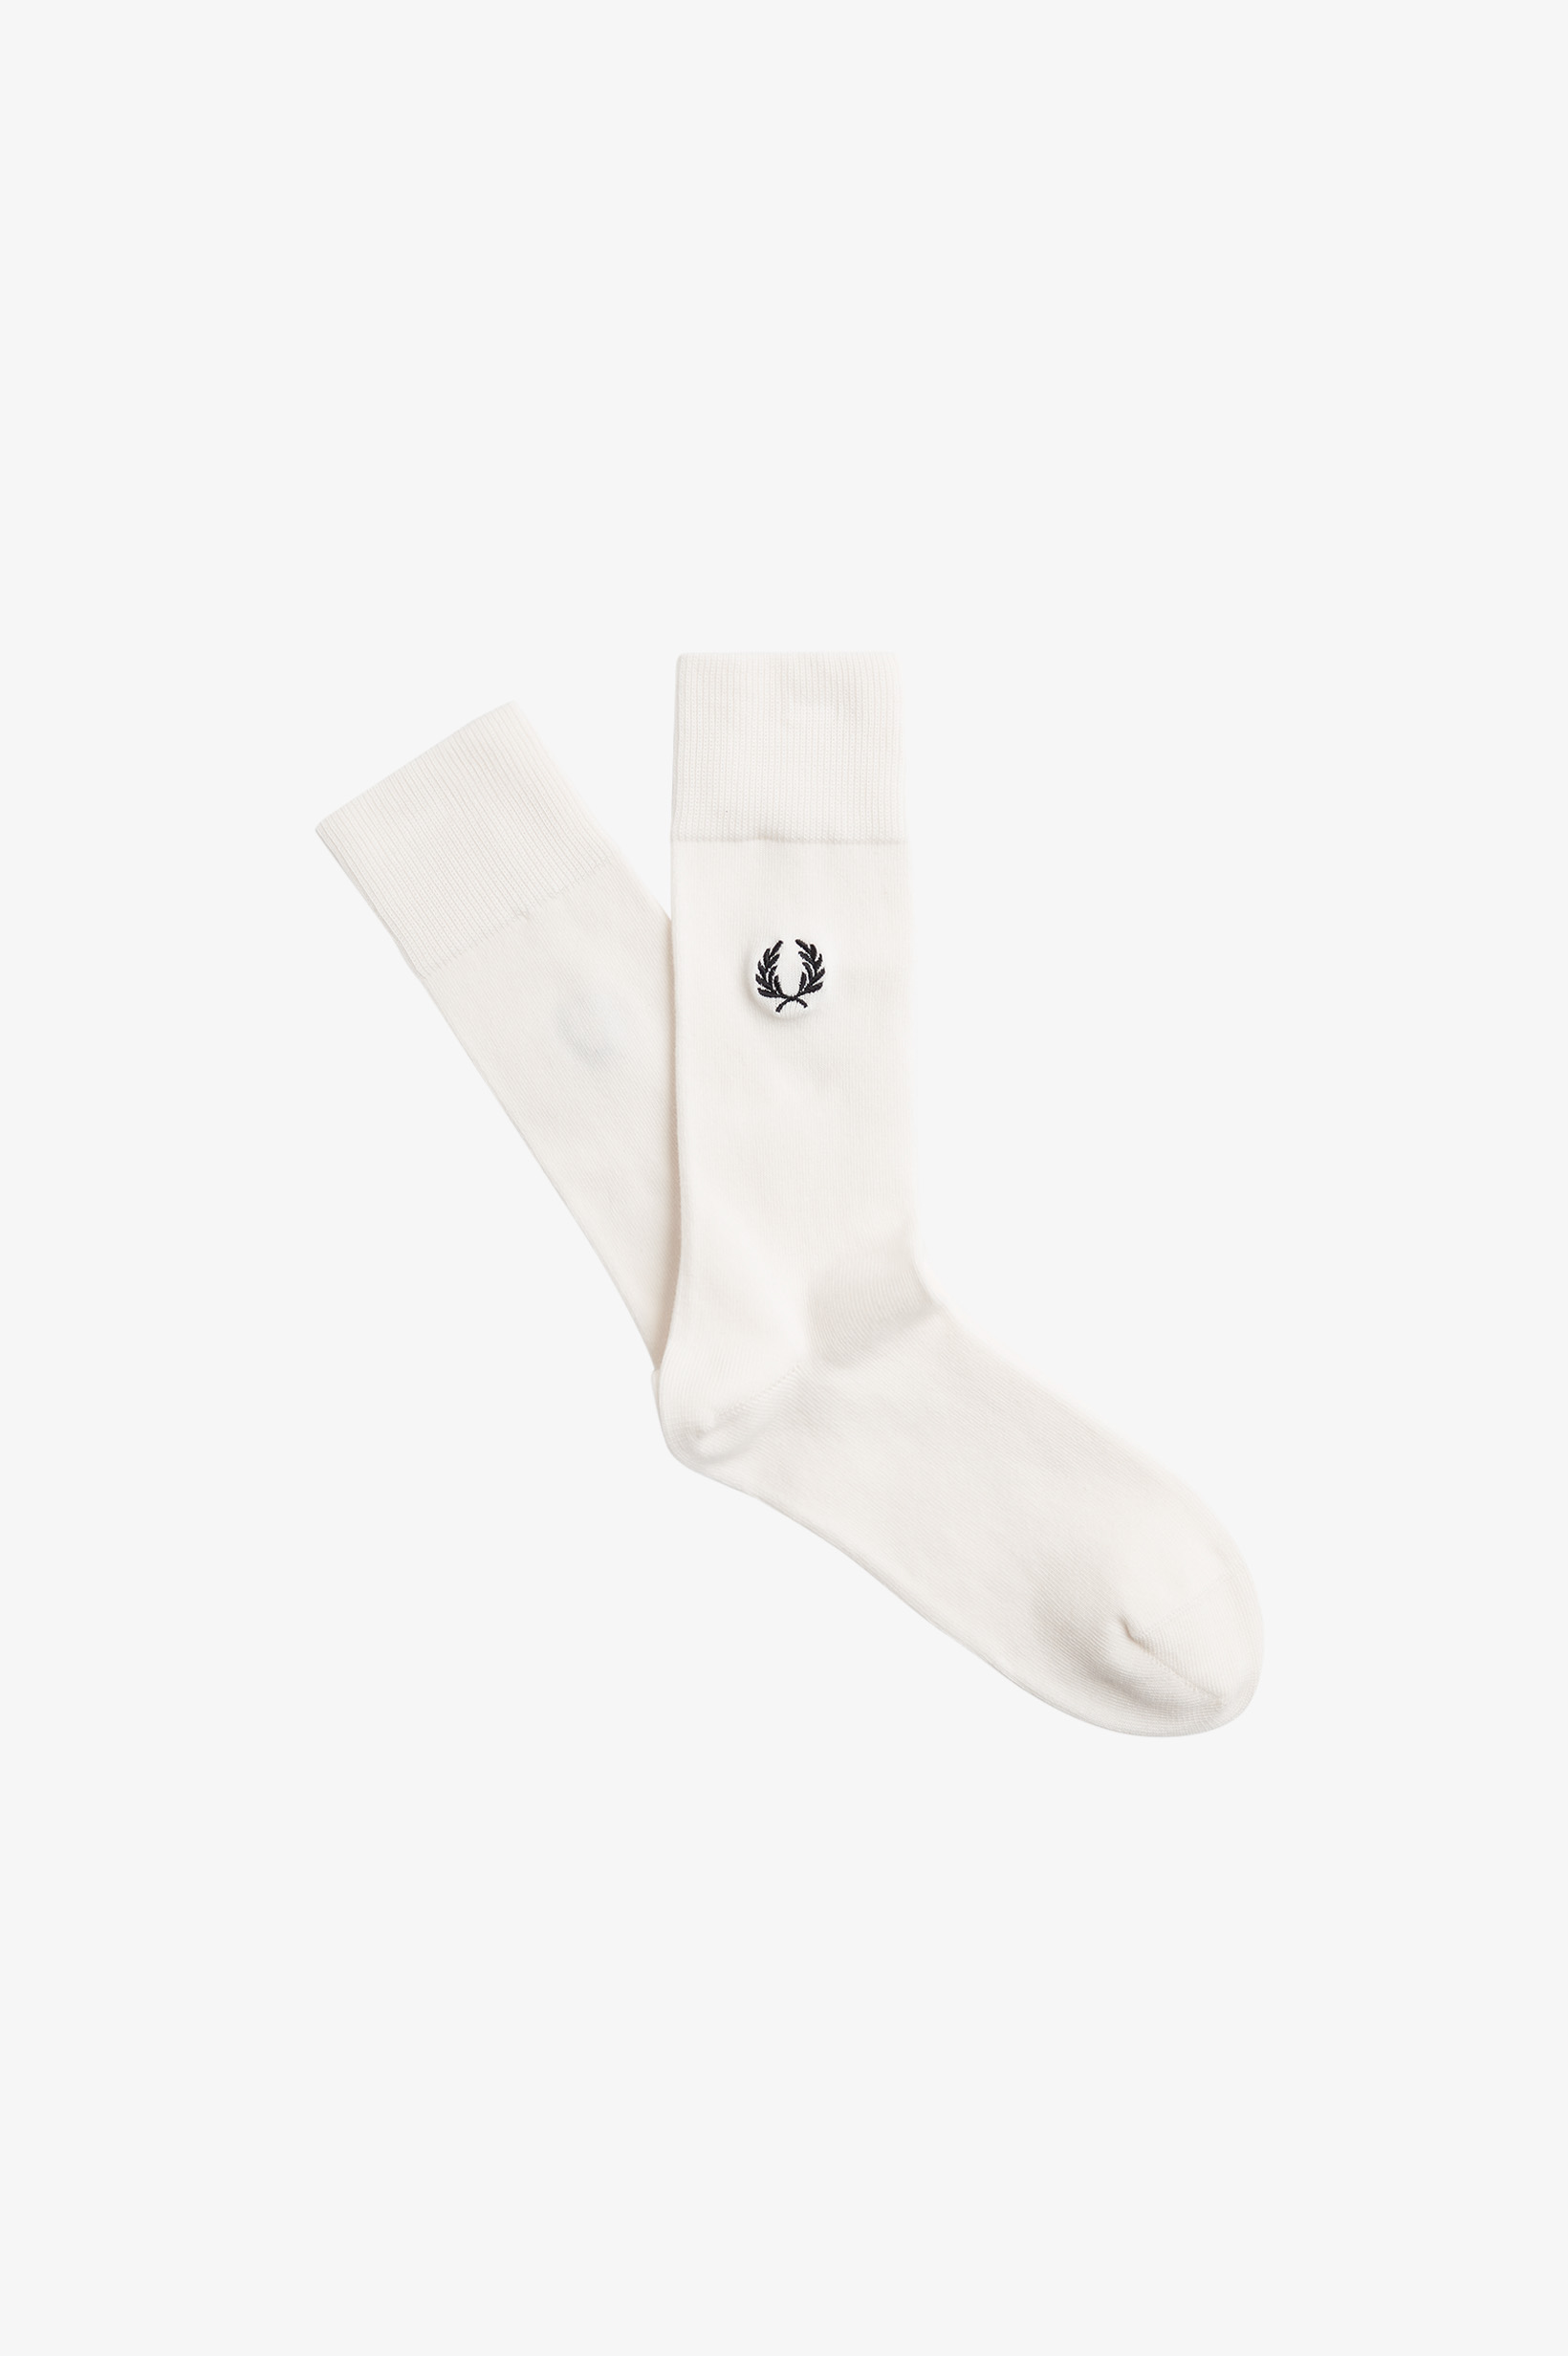 Fred Perry - CLASSIC LAUREL WREATH SOCK - Snow White/Black